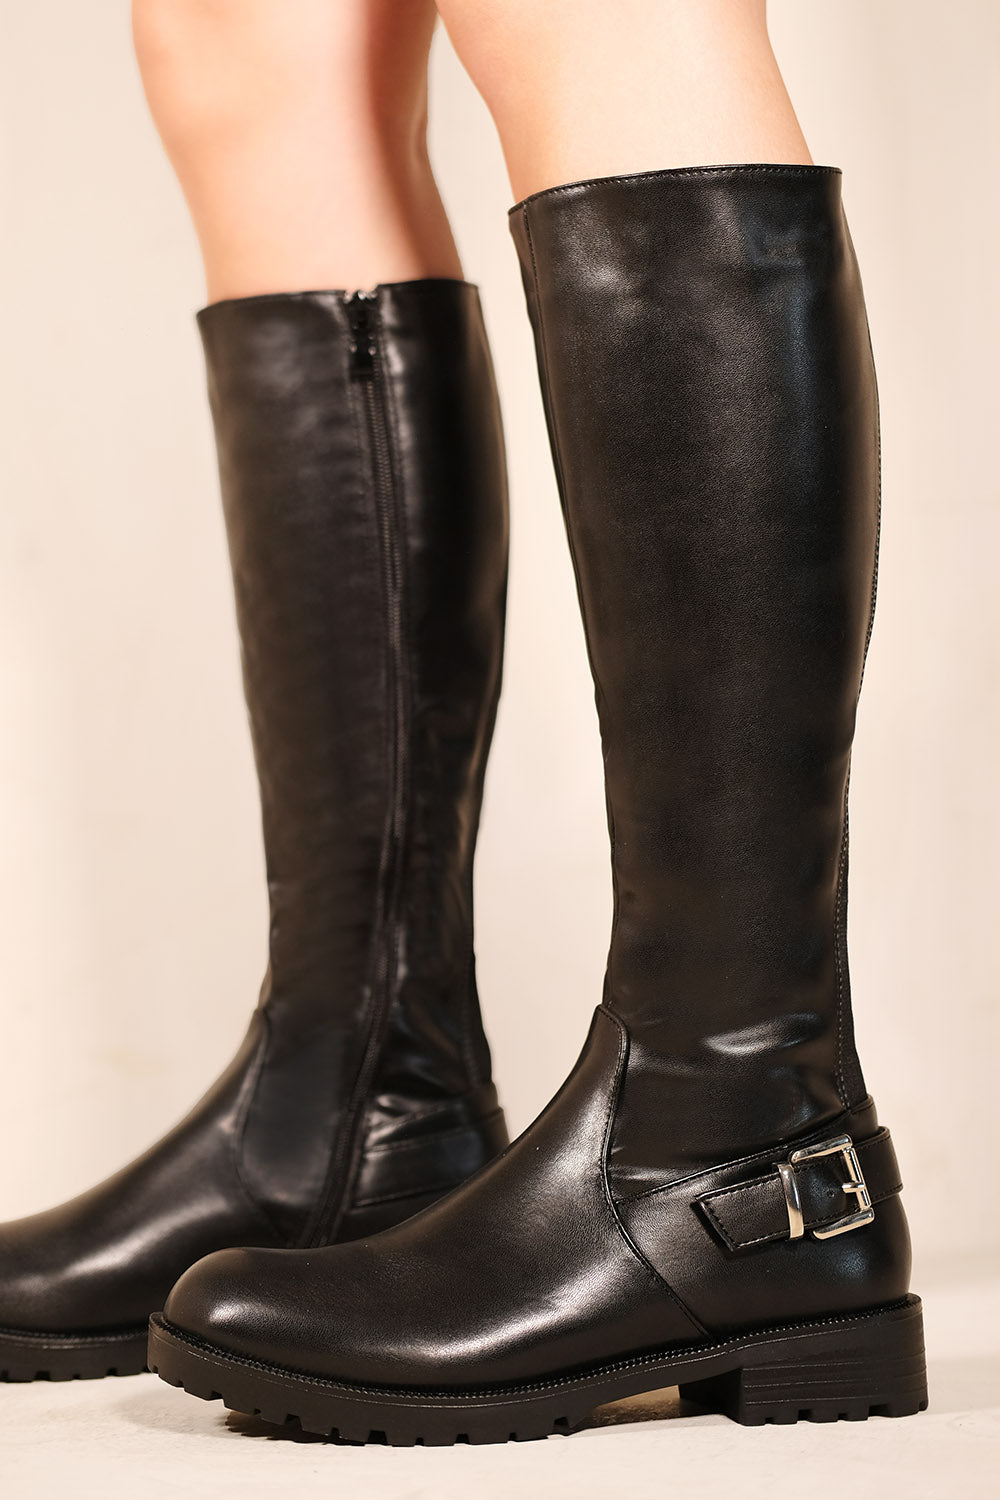 ROOBIE CALF HIGH STRETCH BOOTS WITH BUCKLE IN BLACK FAUX LEATHER